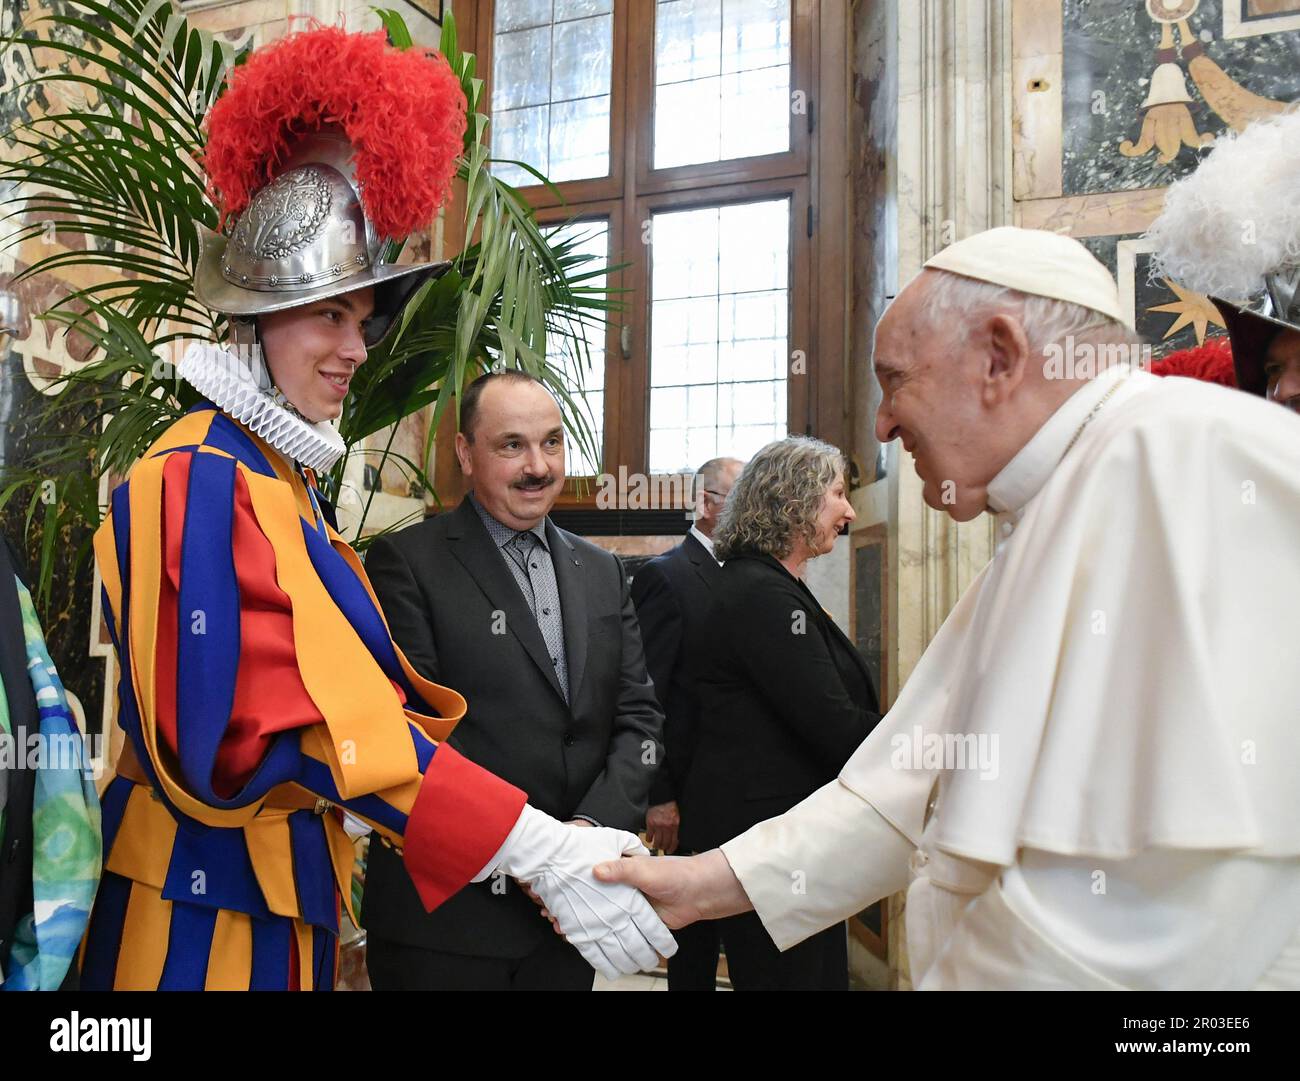 Pope Francis receives the 23 new recruits of the Swiss Guard in the Clementine Hall in the Vatican on May 6, 2023. Pope Francis received in audience the Swiss Guards on as they prepare for the traditional swearing-in ceremony of the new recruits which takes place every year on May 6. The day marks the anniversary of the heroic sacrifice of 147 Swiss guards who died during the Sack of Rome in 1527 as they protected Pope Clement VII. Photo by Vatican Media (EV) /ABACAPRESS.COM Credit: Abaca Press/Alamy Live News Stock Photo